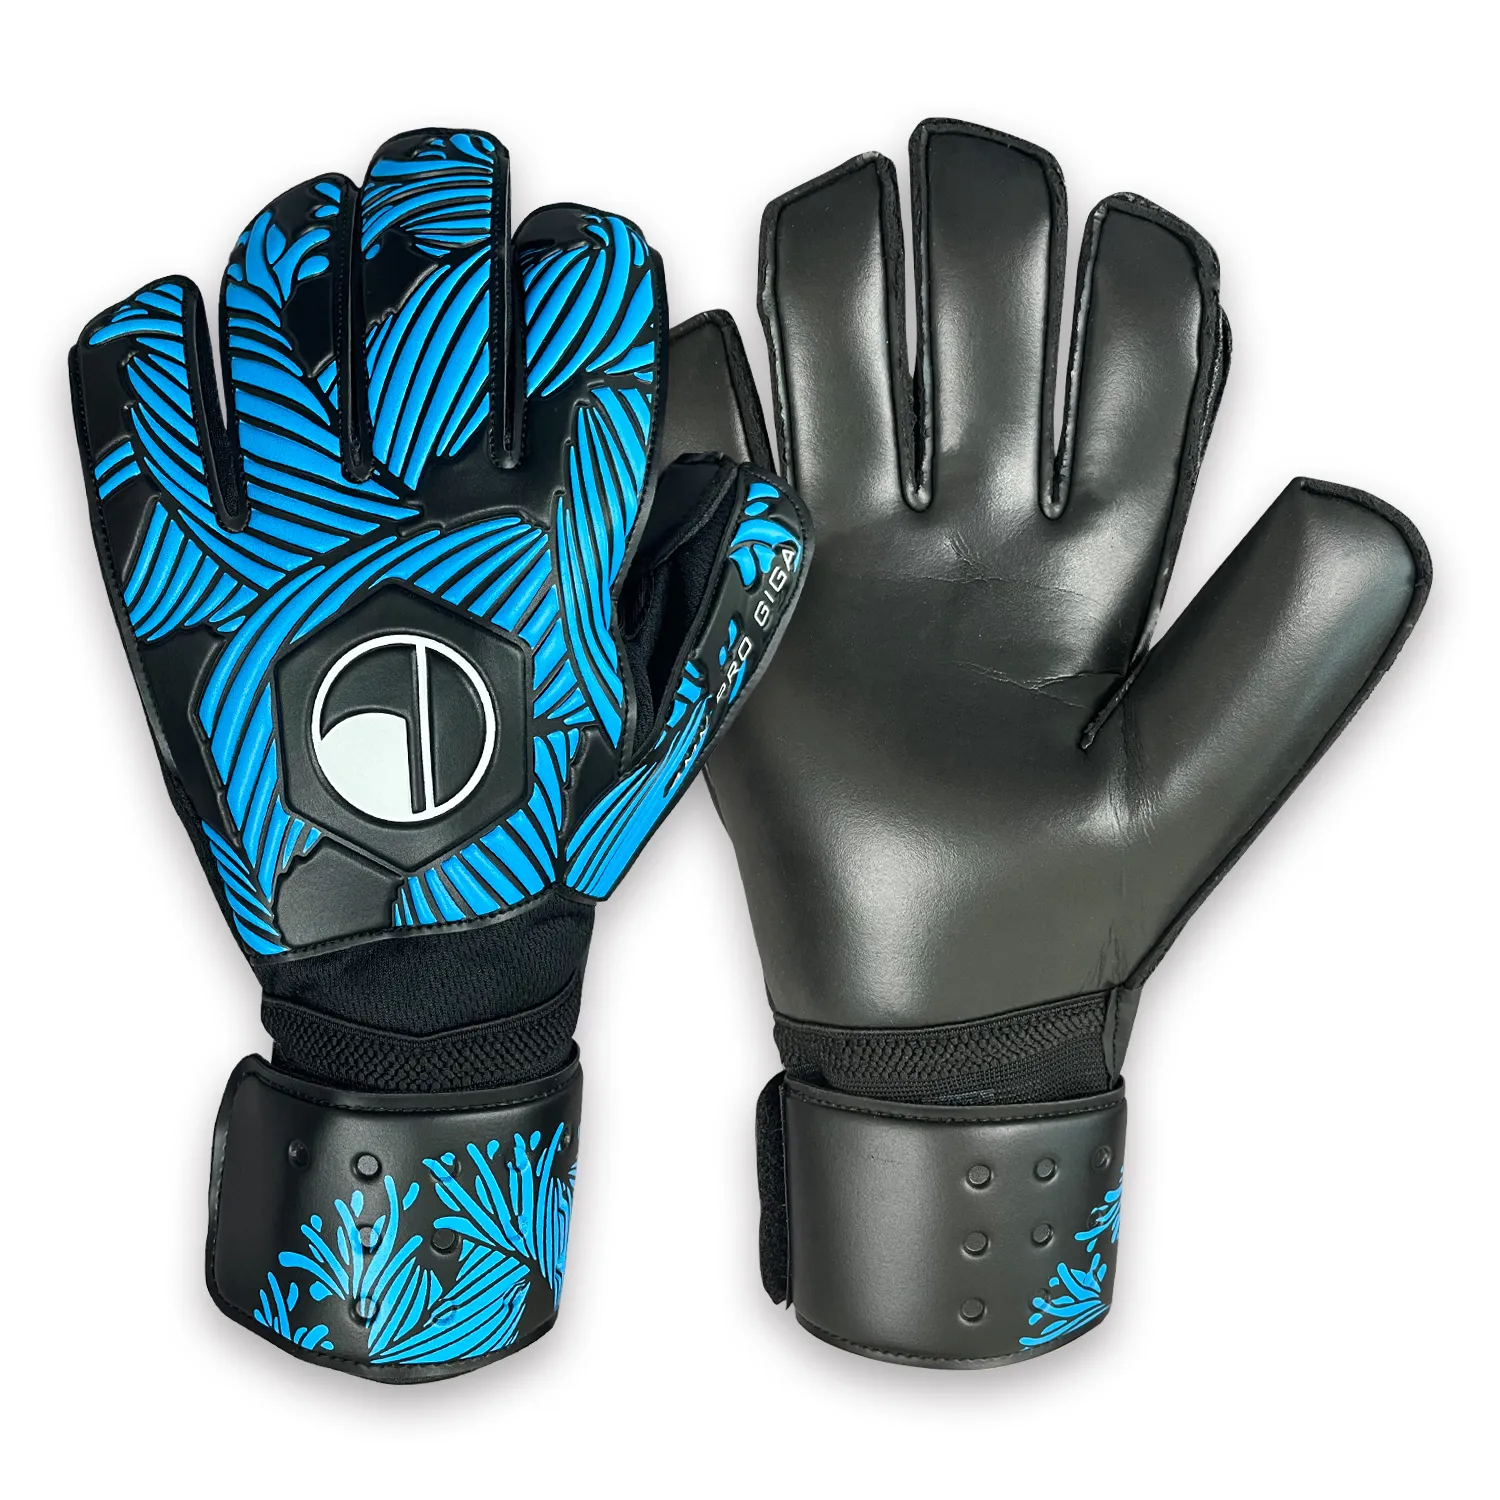 PANPASI Breathable Soccer Goalie Ice Fishing Gloves With Fingersave 4mm  Latex For Kids, Youth, And Adults From Bjpanpasi, $25.09